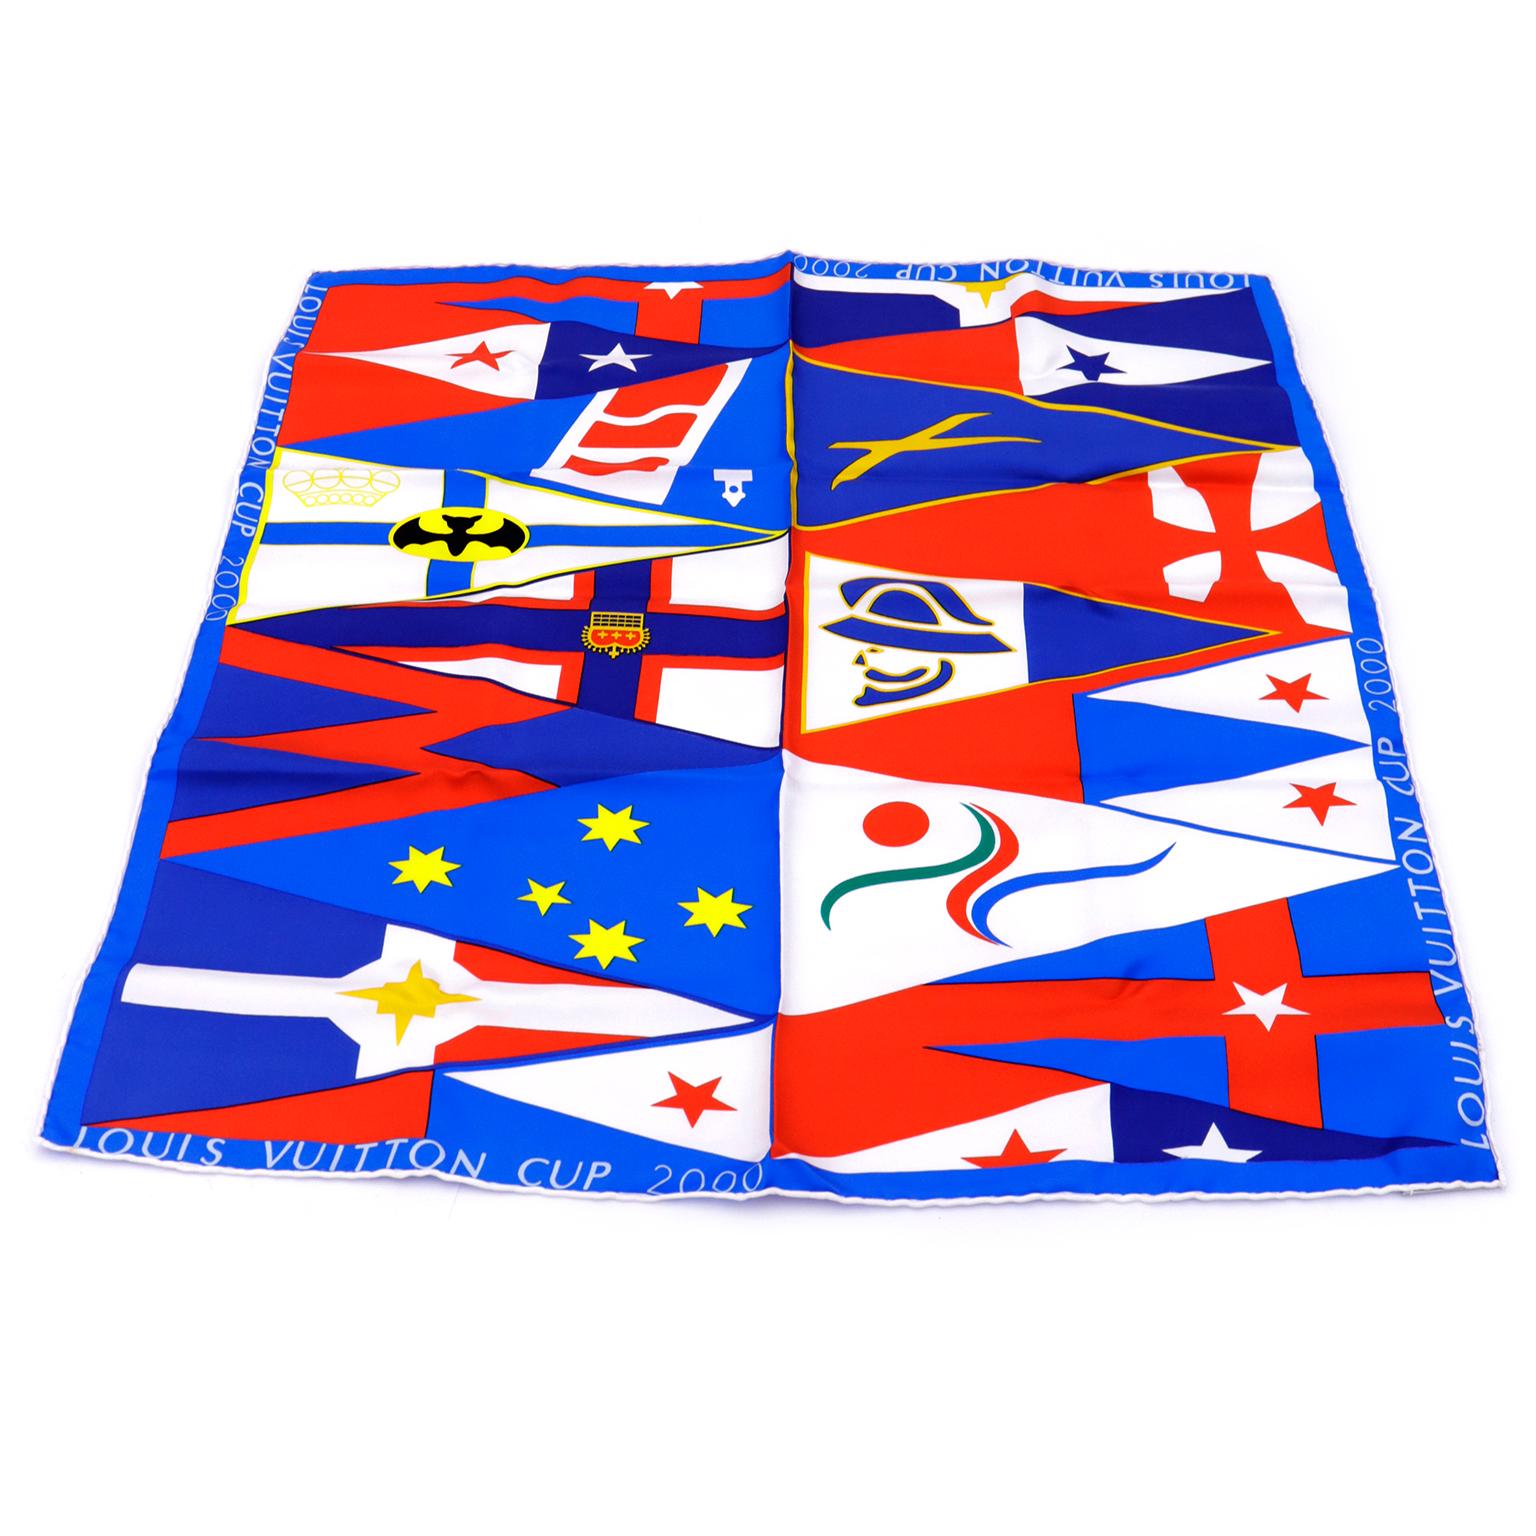 Louis Vuitton Cup 2000 Red & Blue Silk Scarf Unused in Original Box In Excellent Condition For Sale In Portland, OR